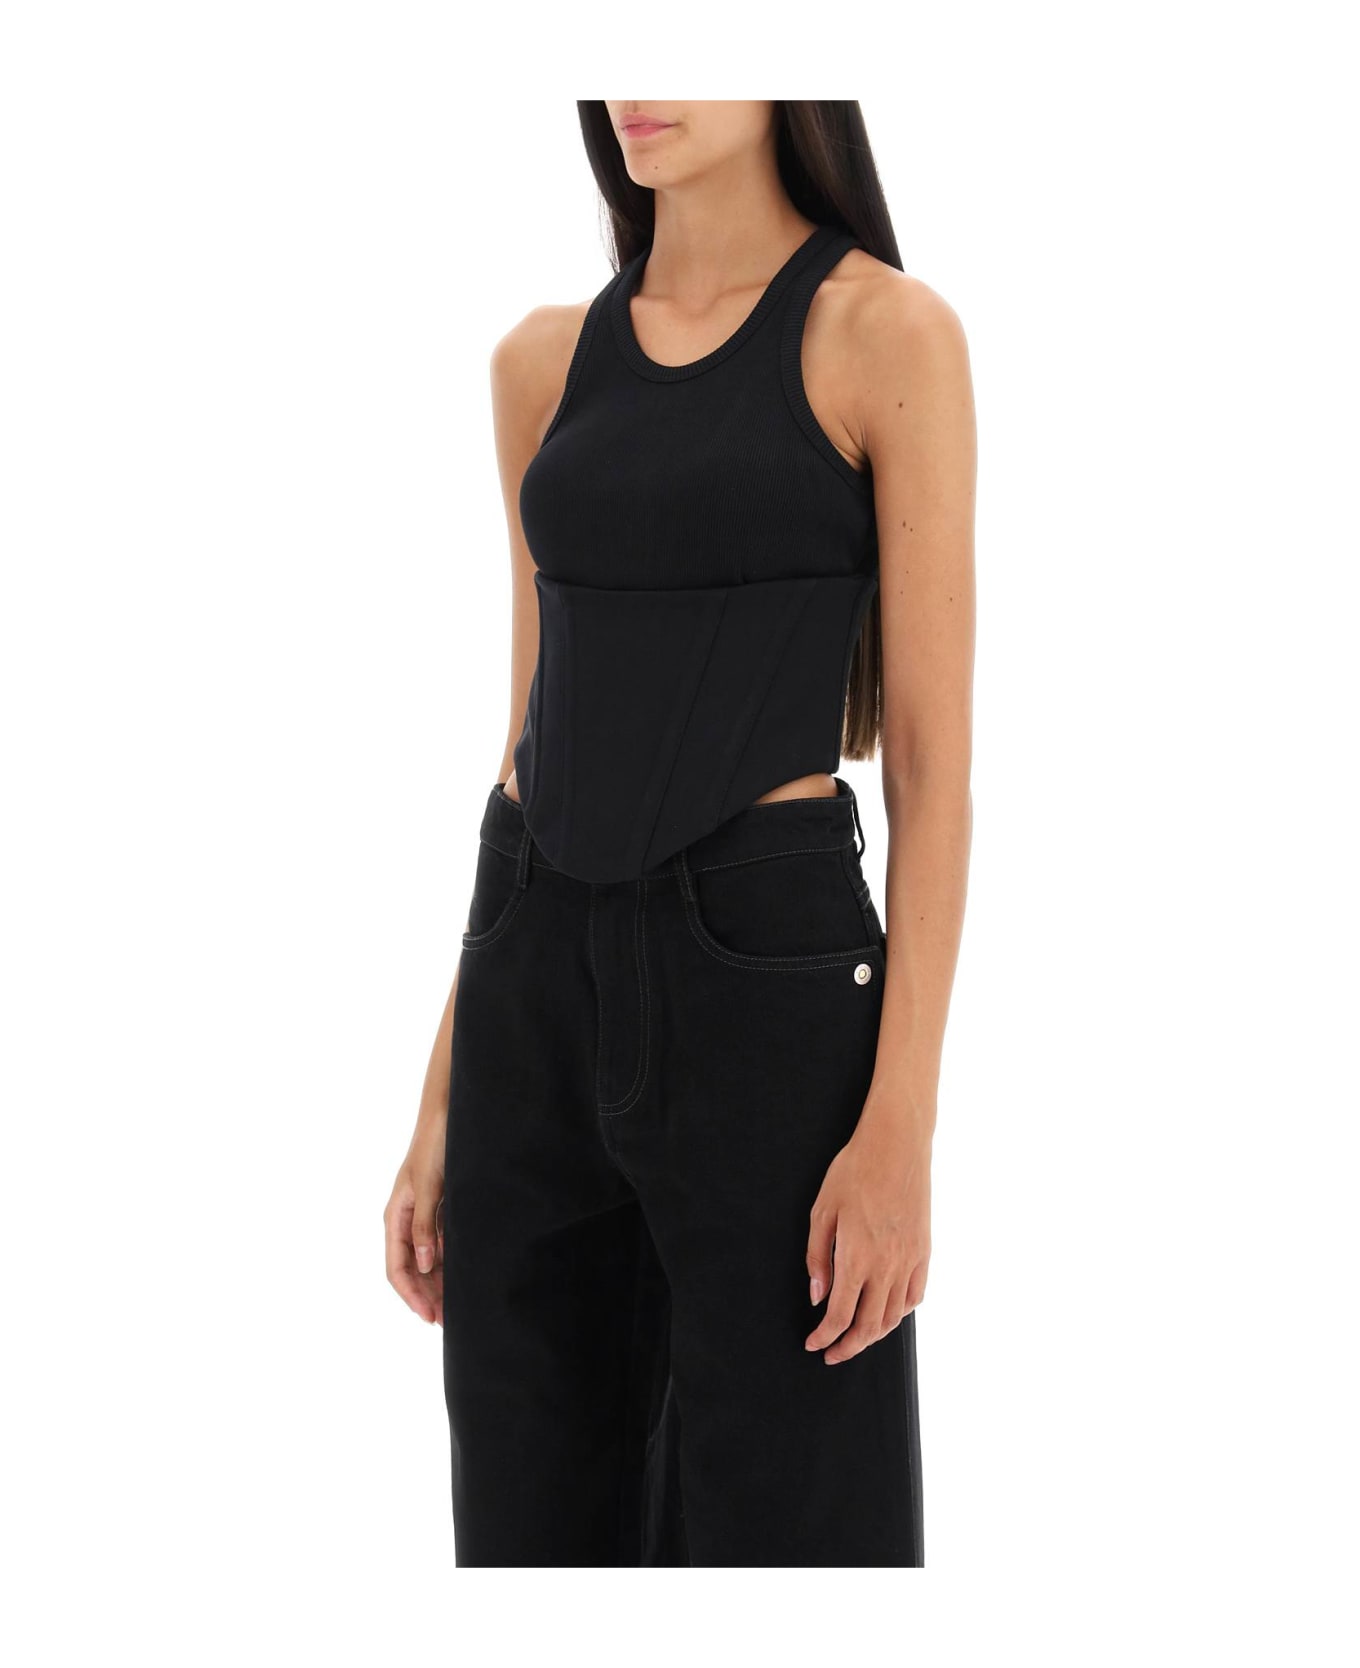 Dion Lee Tank Top With Underbust Corset - BLACK タンクトップ